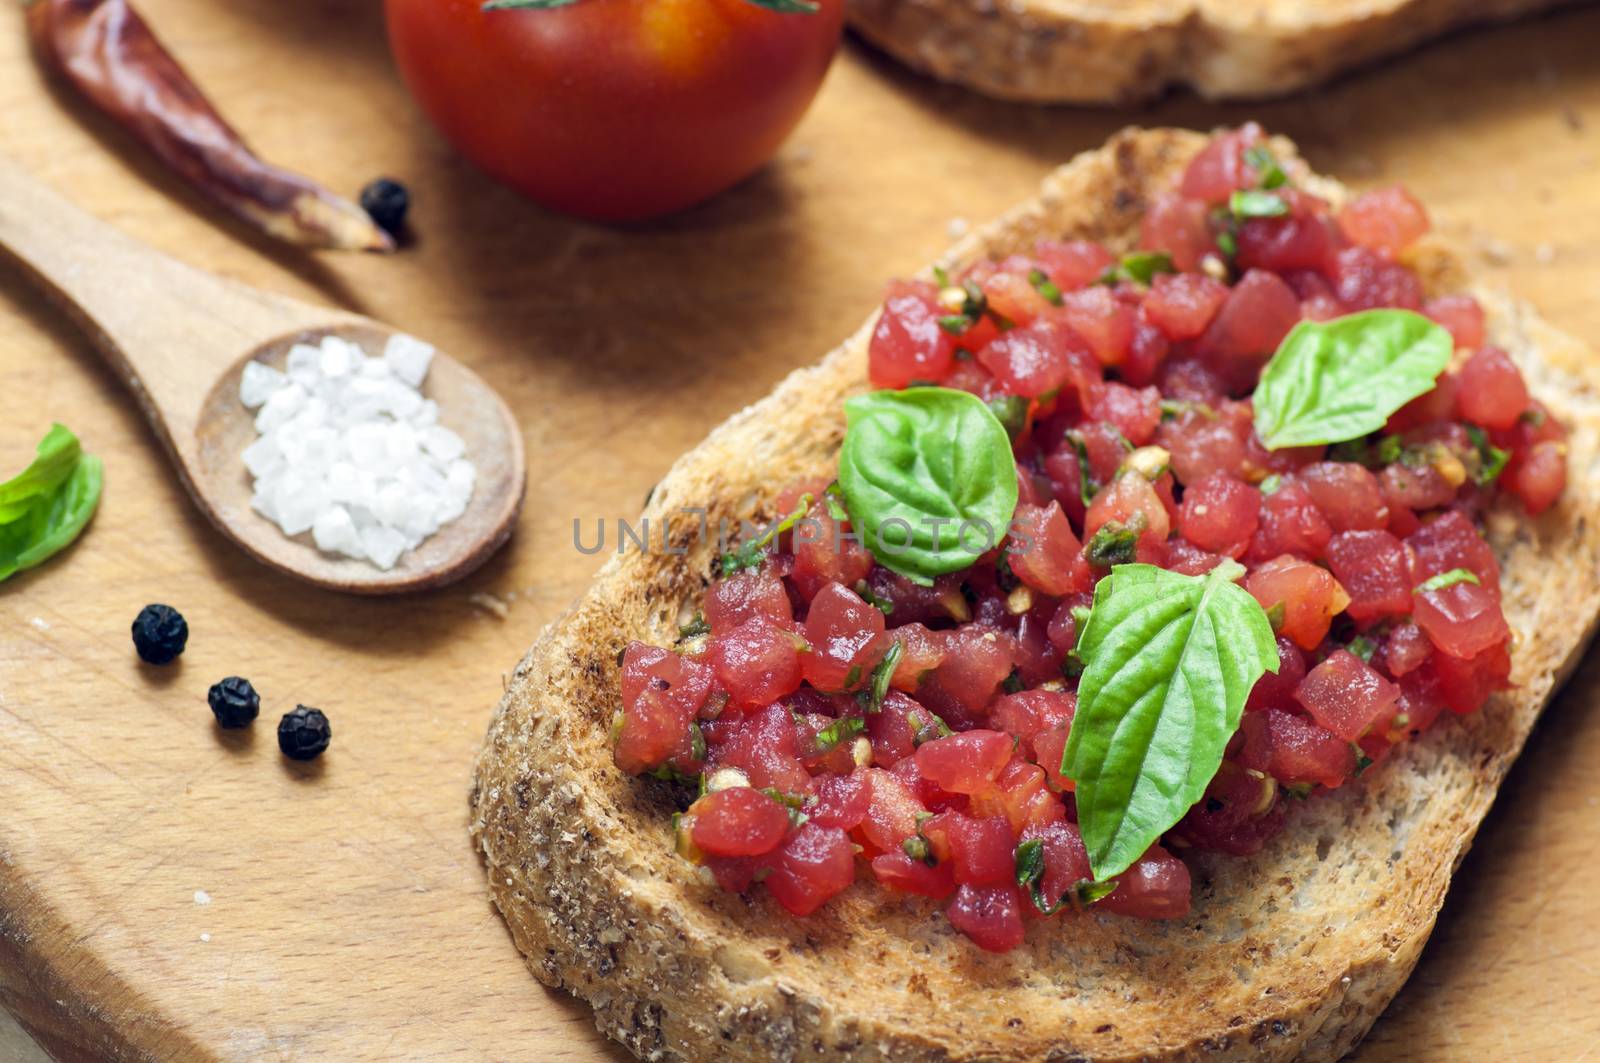 Italian bruschetta topped with tomatoes and basil